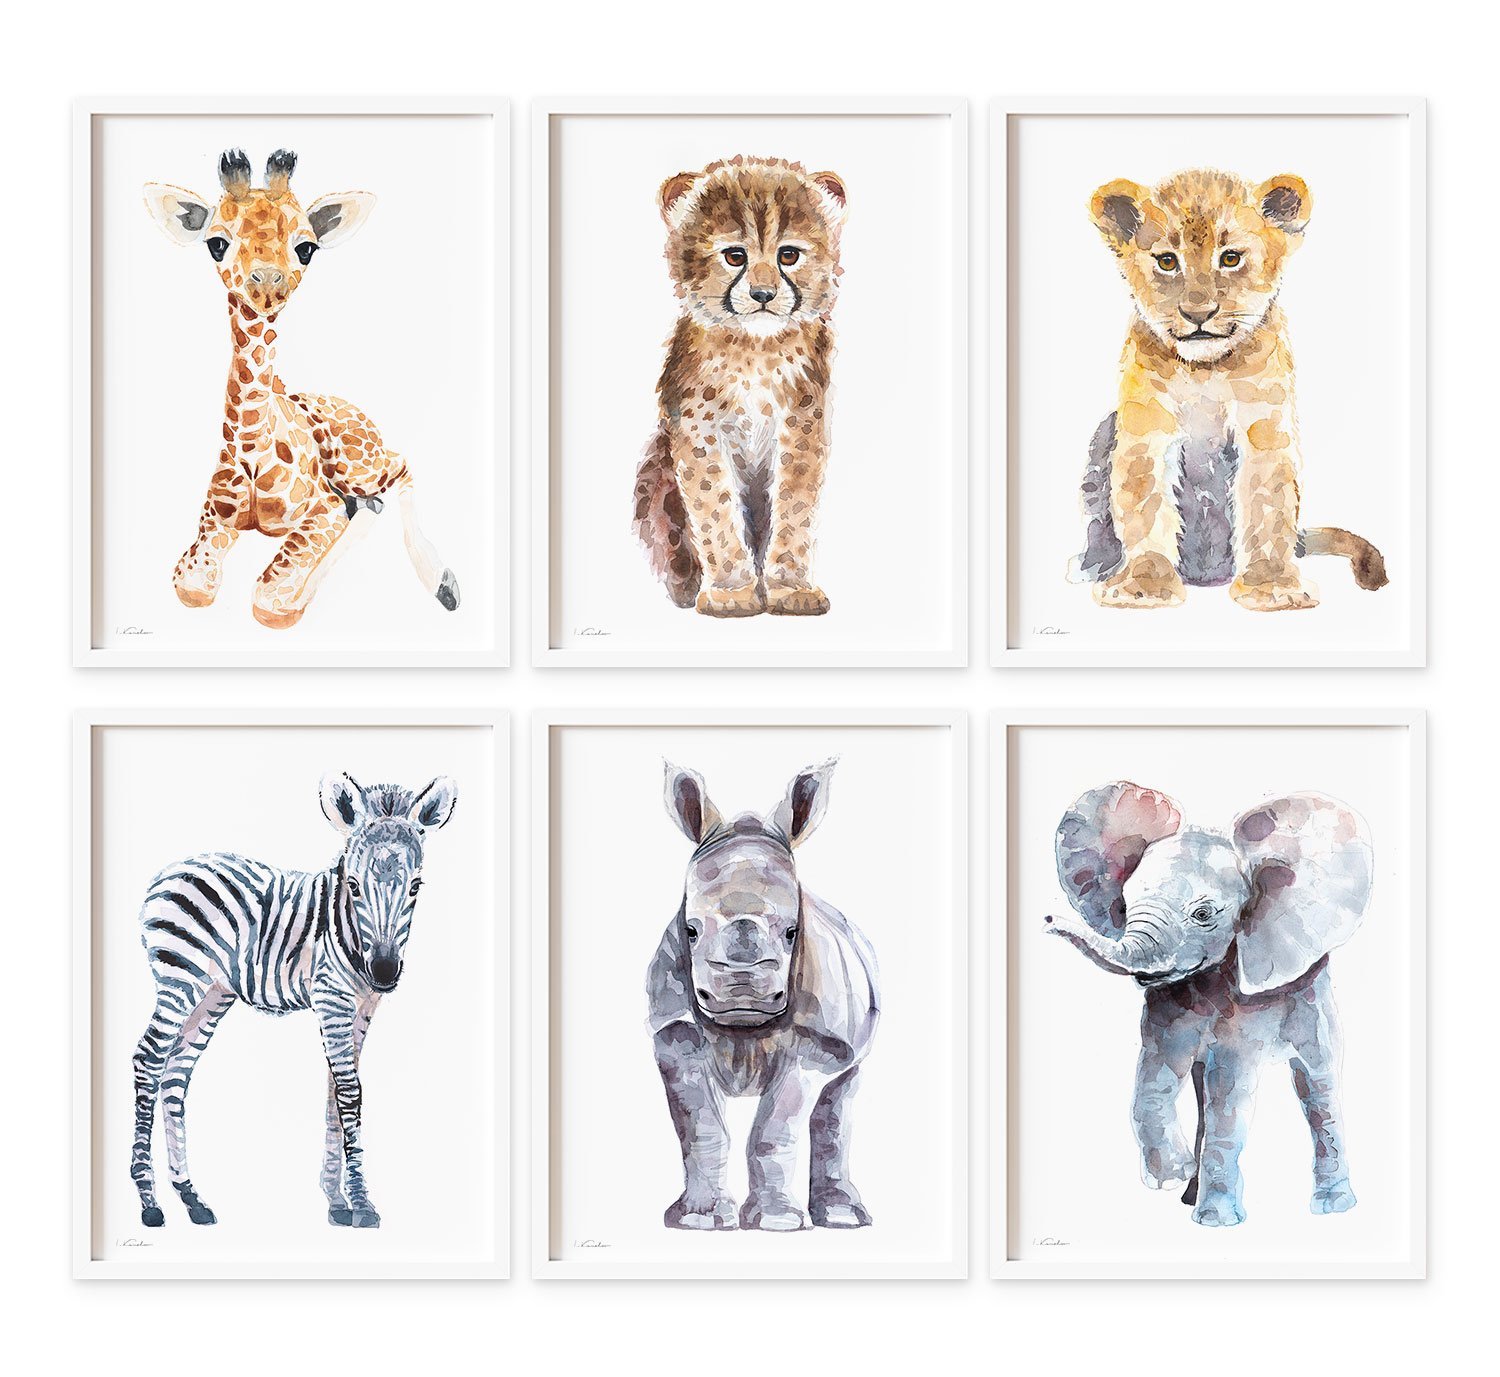 PRE DRAWN CANVAS for Painting, 5 x 7” Printed Canvas to Lion, Zebra,  Elephant £17.21 - PicClick UK